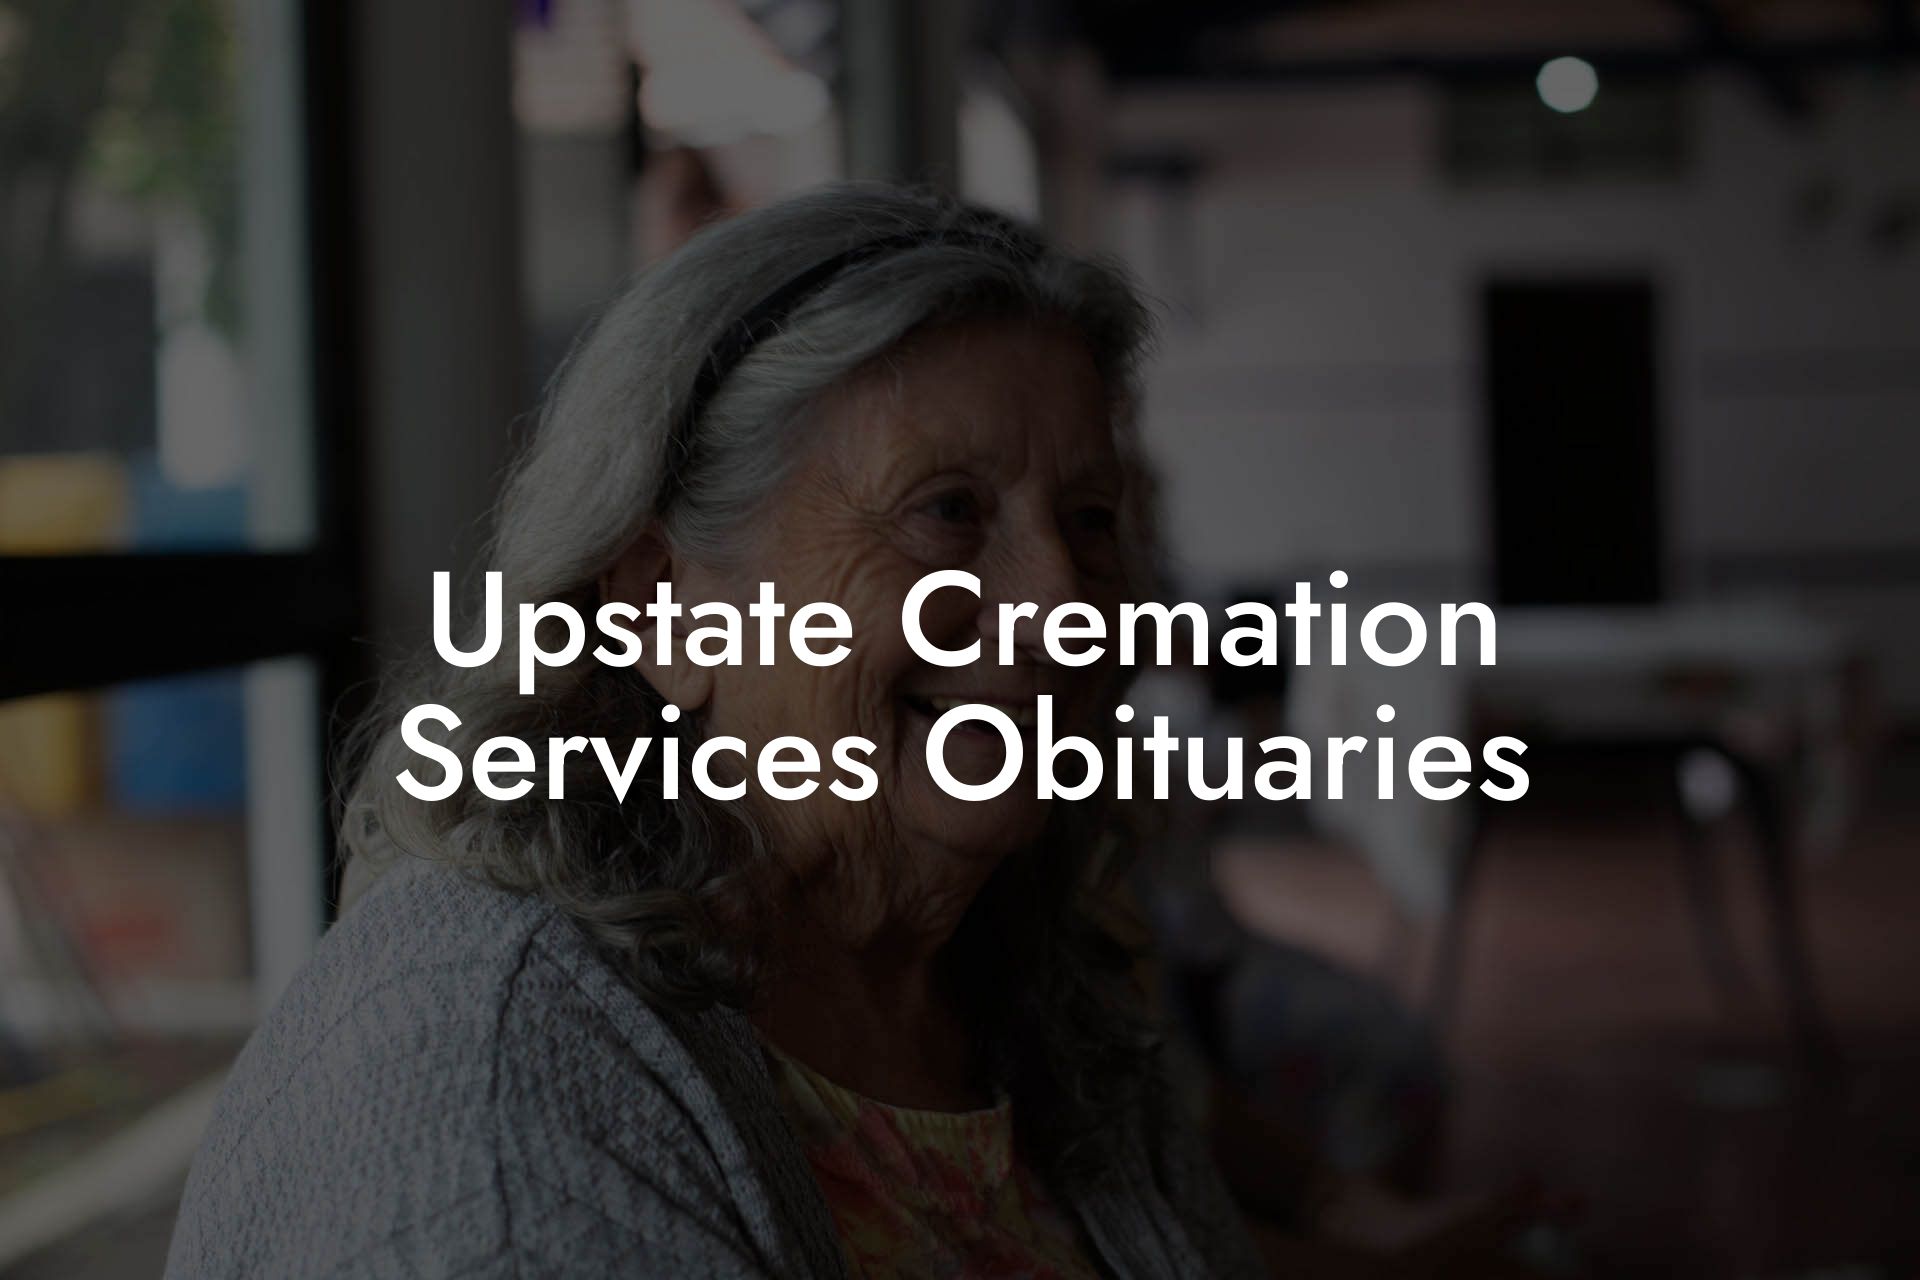 Upstate Cremation Services Obituaries